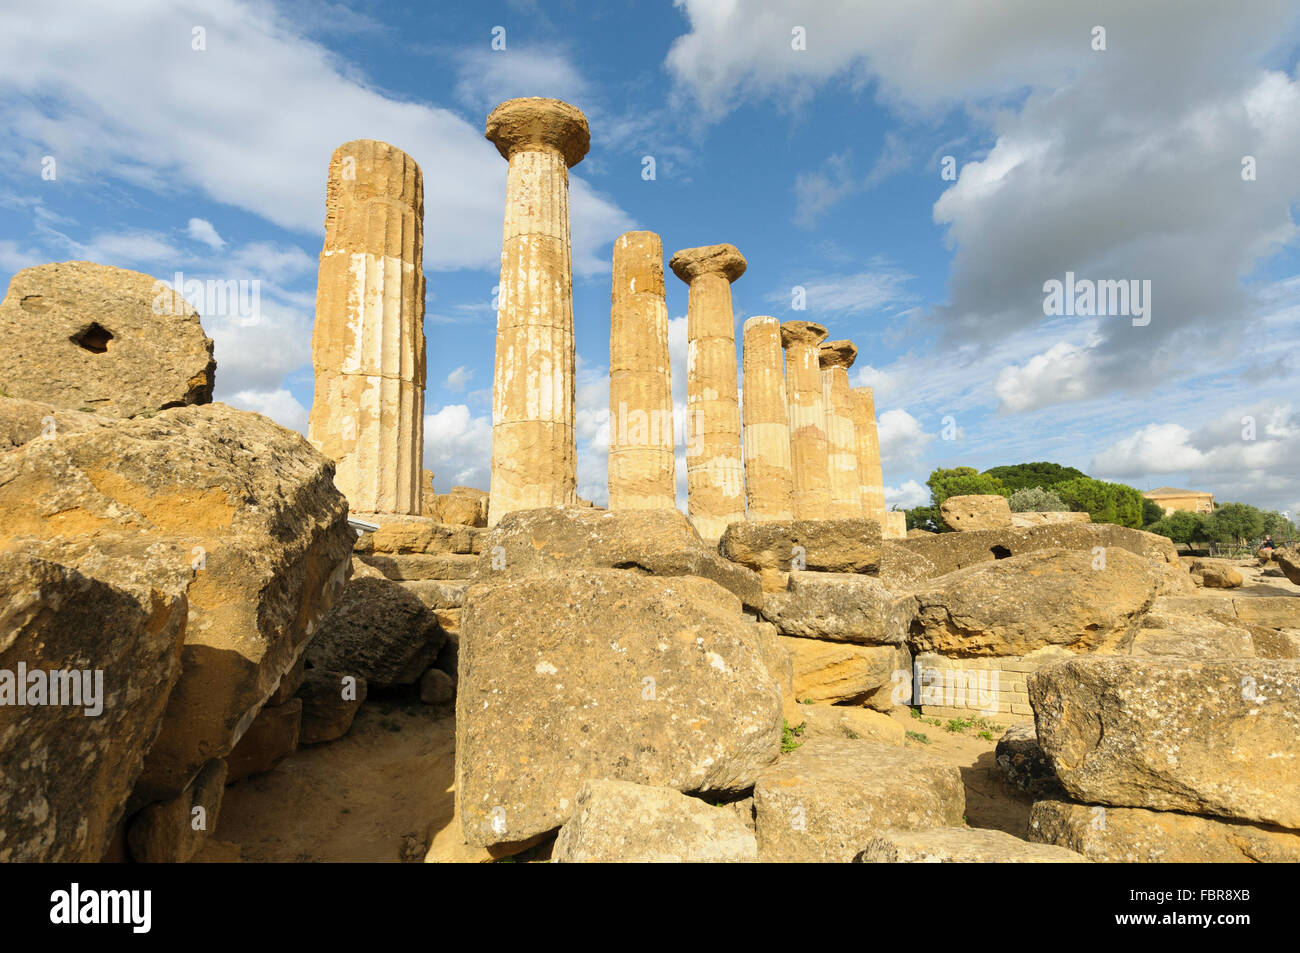 The Temple of Hercules, Valley of Temples, Agrigento, Sicily, Italy Stock Photo